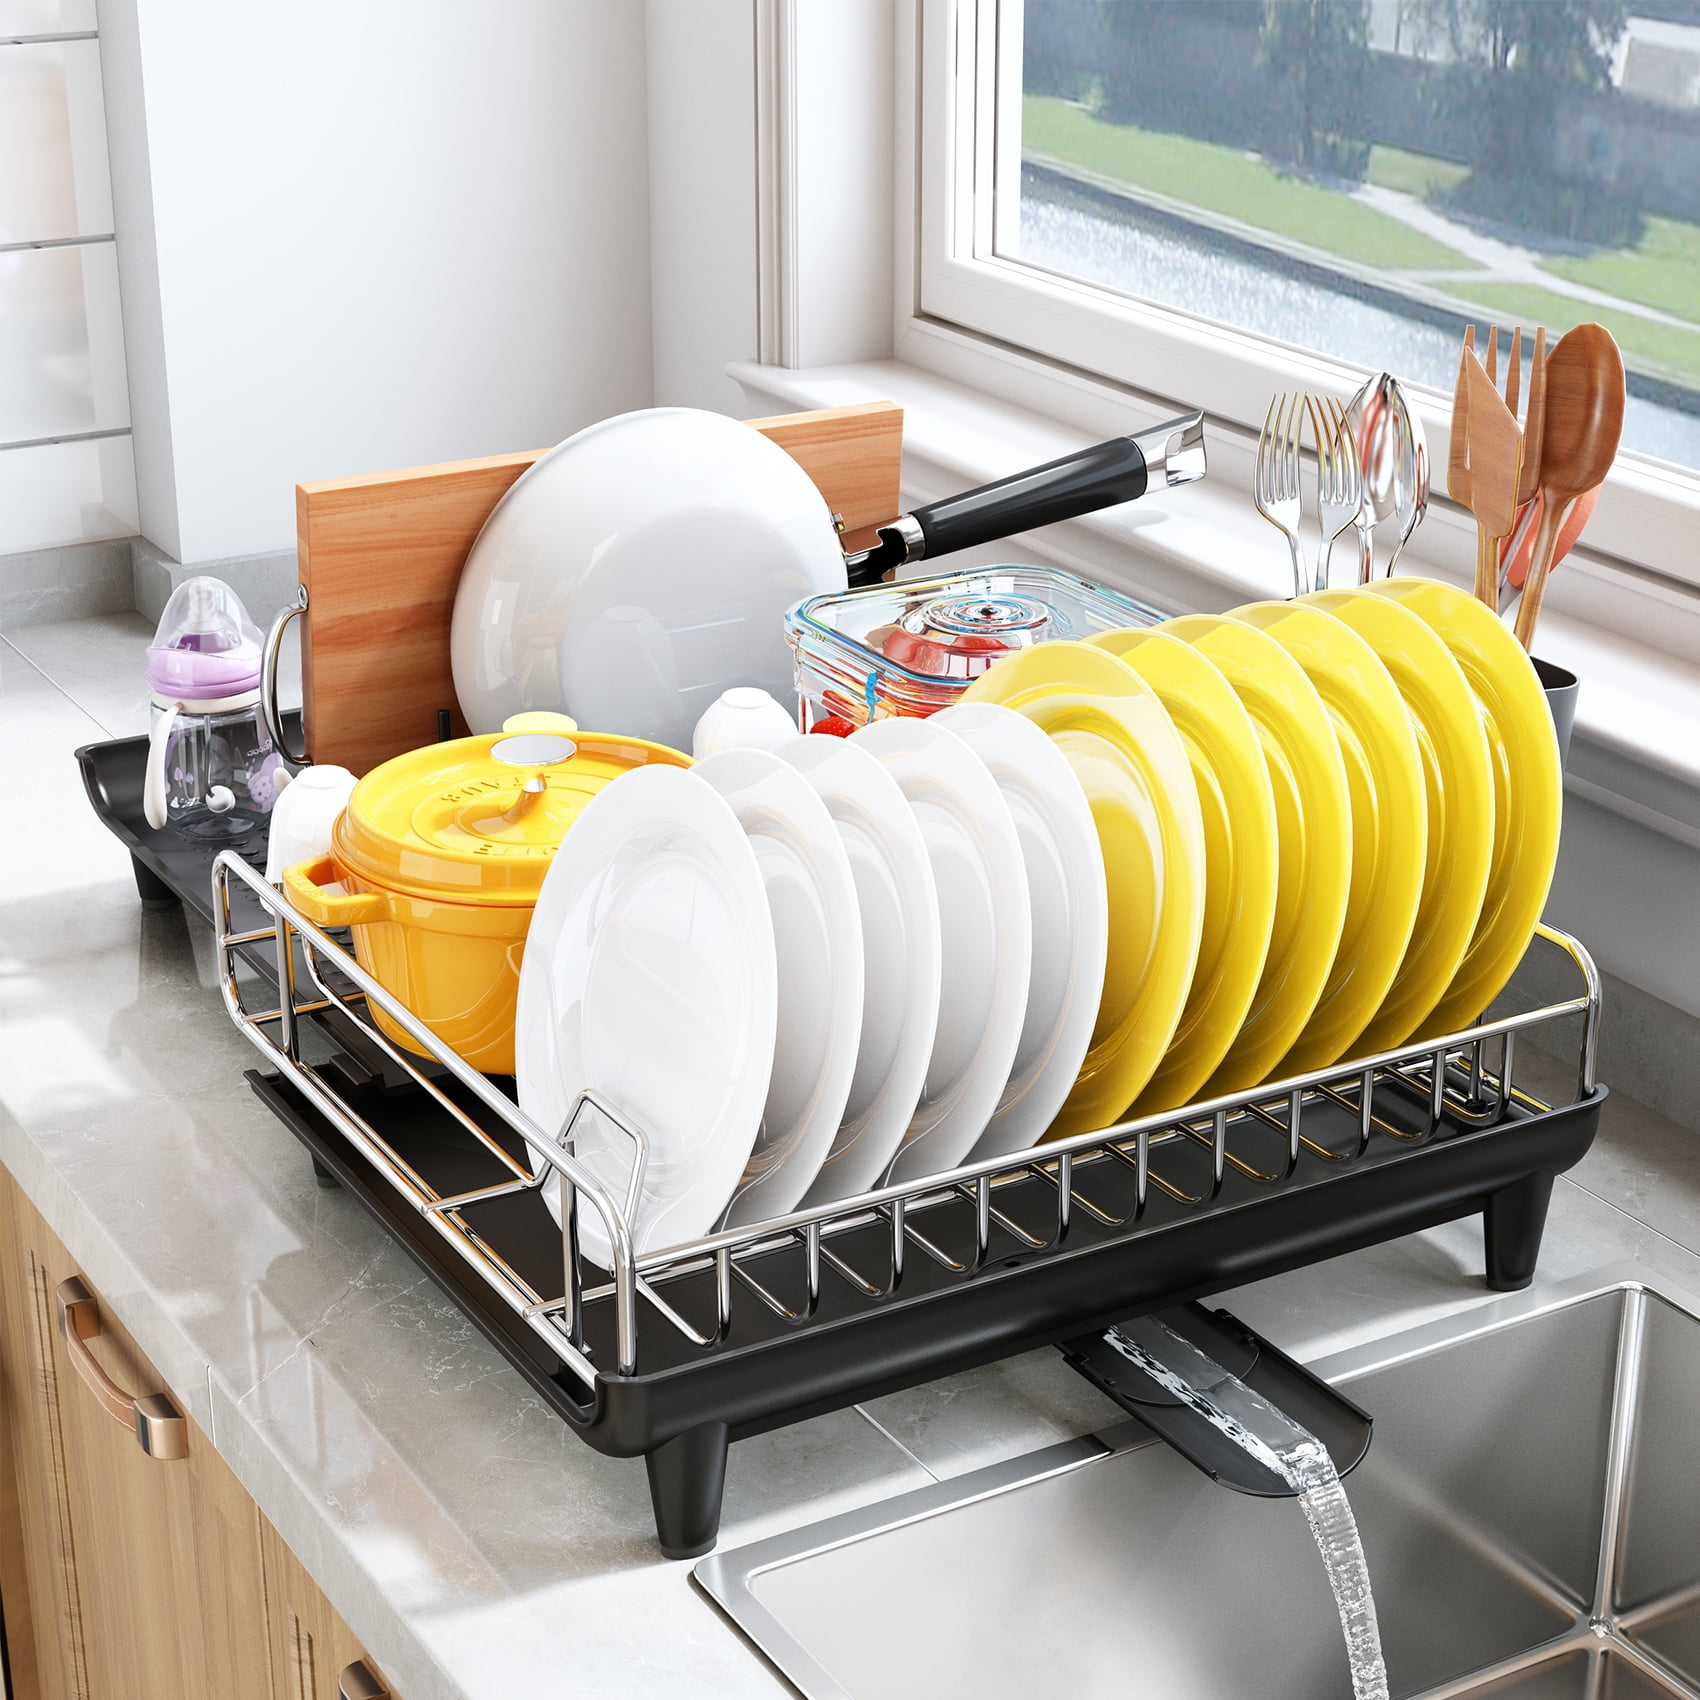 Dish Drying Rack, Kitchen Counter Dish Drainers Rack Expandable(16.9 to  26.8), Auto-Drain Drainboard Stainless Steel Large Strainers Drying Rack  with Pan Holder Utensil Holder Caddy Organizer, Black 